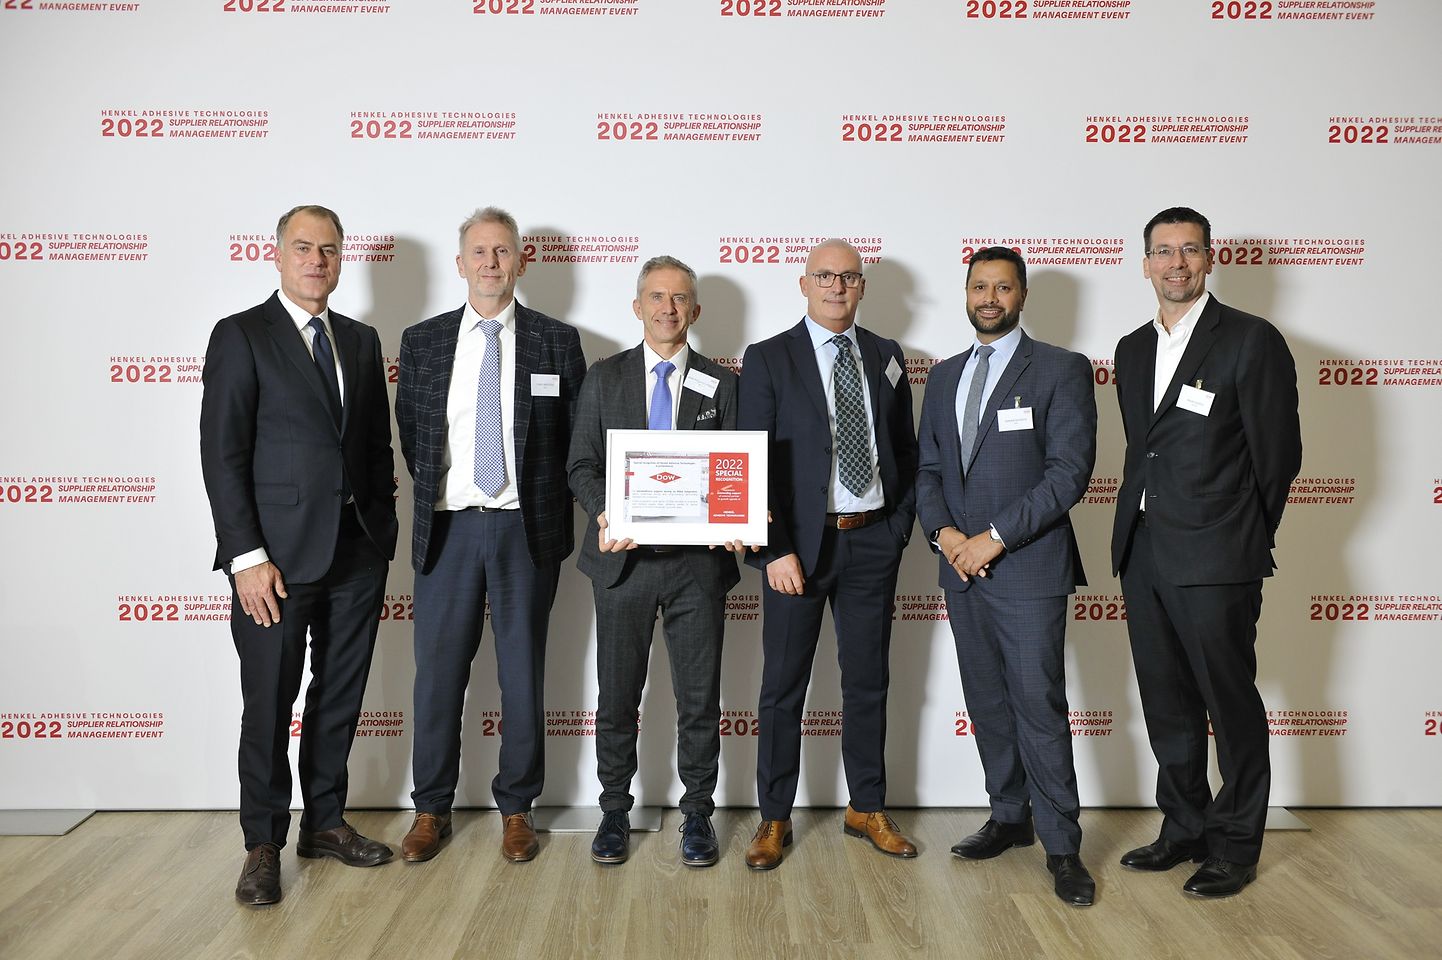 
Special Recognition for Dow (from left to right): Jan-Dirk Auris, Executive Vice President Henkel Adhesive Technologies, Chris Mertens, Global Key Customer Manager at Dow, Jean Paul Hautekeer, Global Marketing Director Building and Infrastructure at Dow, Massimo Rebolini, Global Commercial Vice President at Dow, Imran Munshi, Global Market Segment Leader at Dow and Mark Dorn, Corporate Senior Vice President Craftsmen, Construction and Professional at Henkel Adhesive Technologies